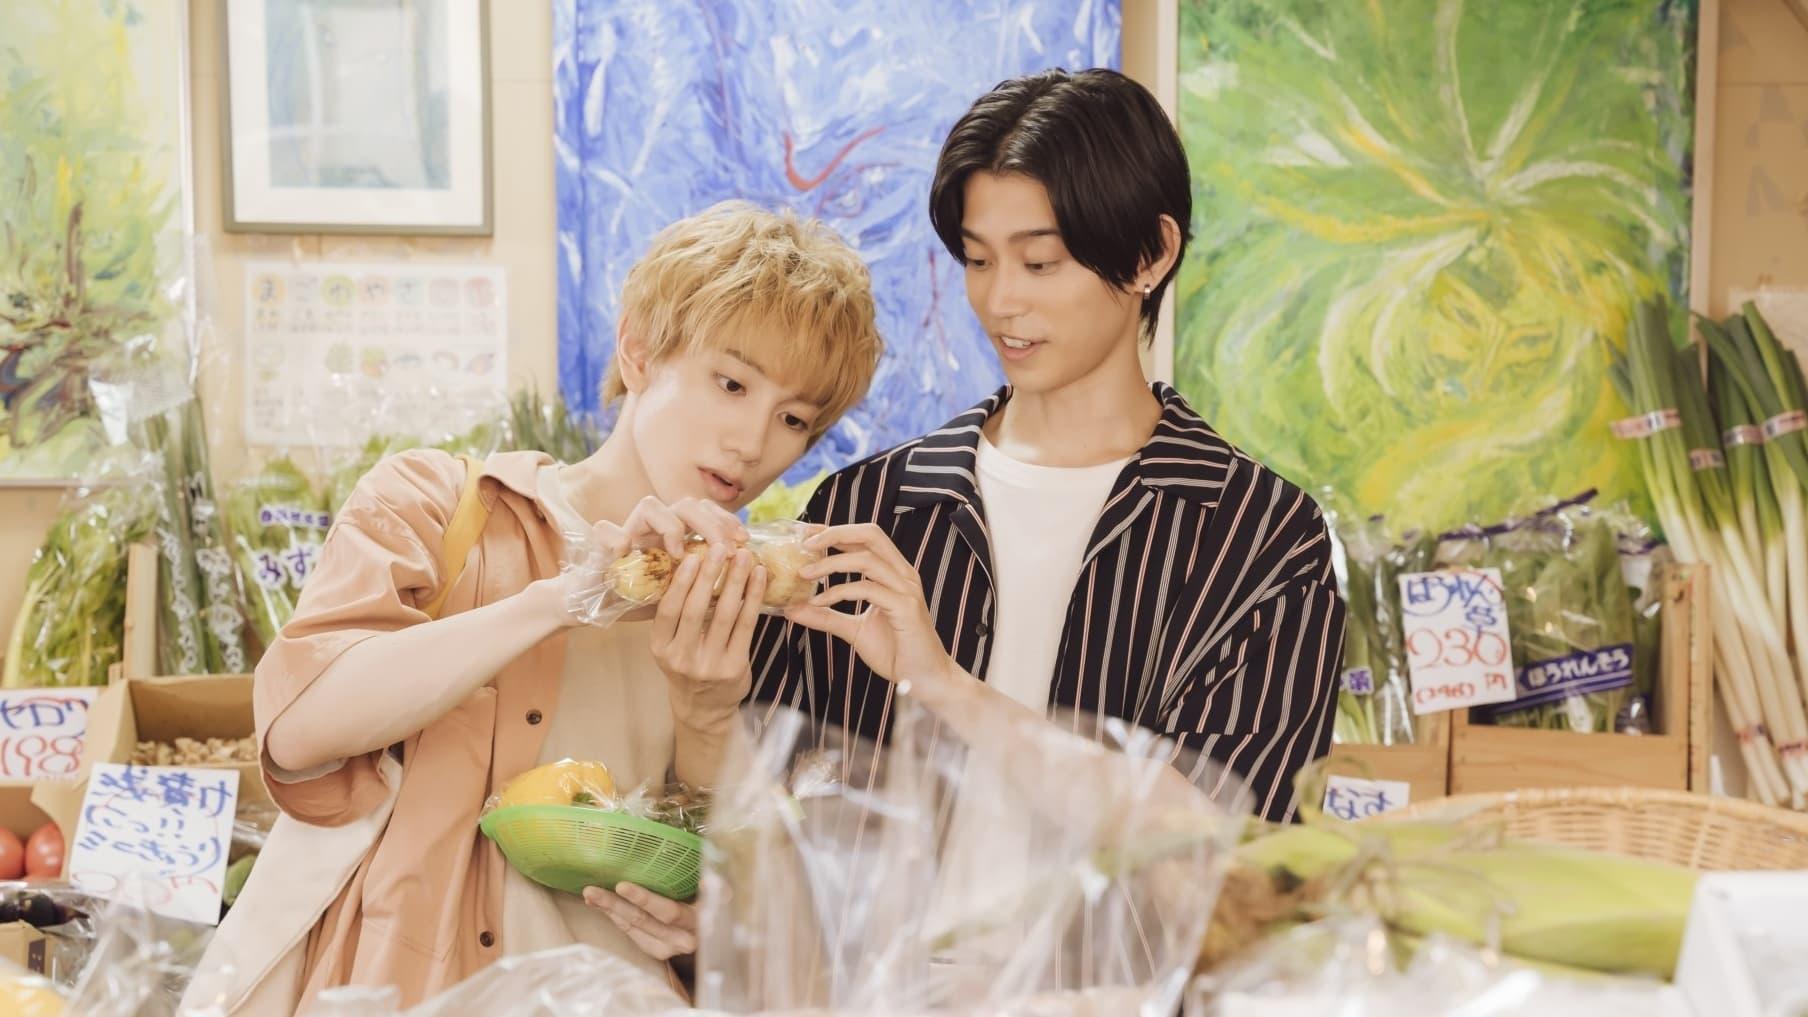 Let's Eat Together, Aki and Haru backdrop